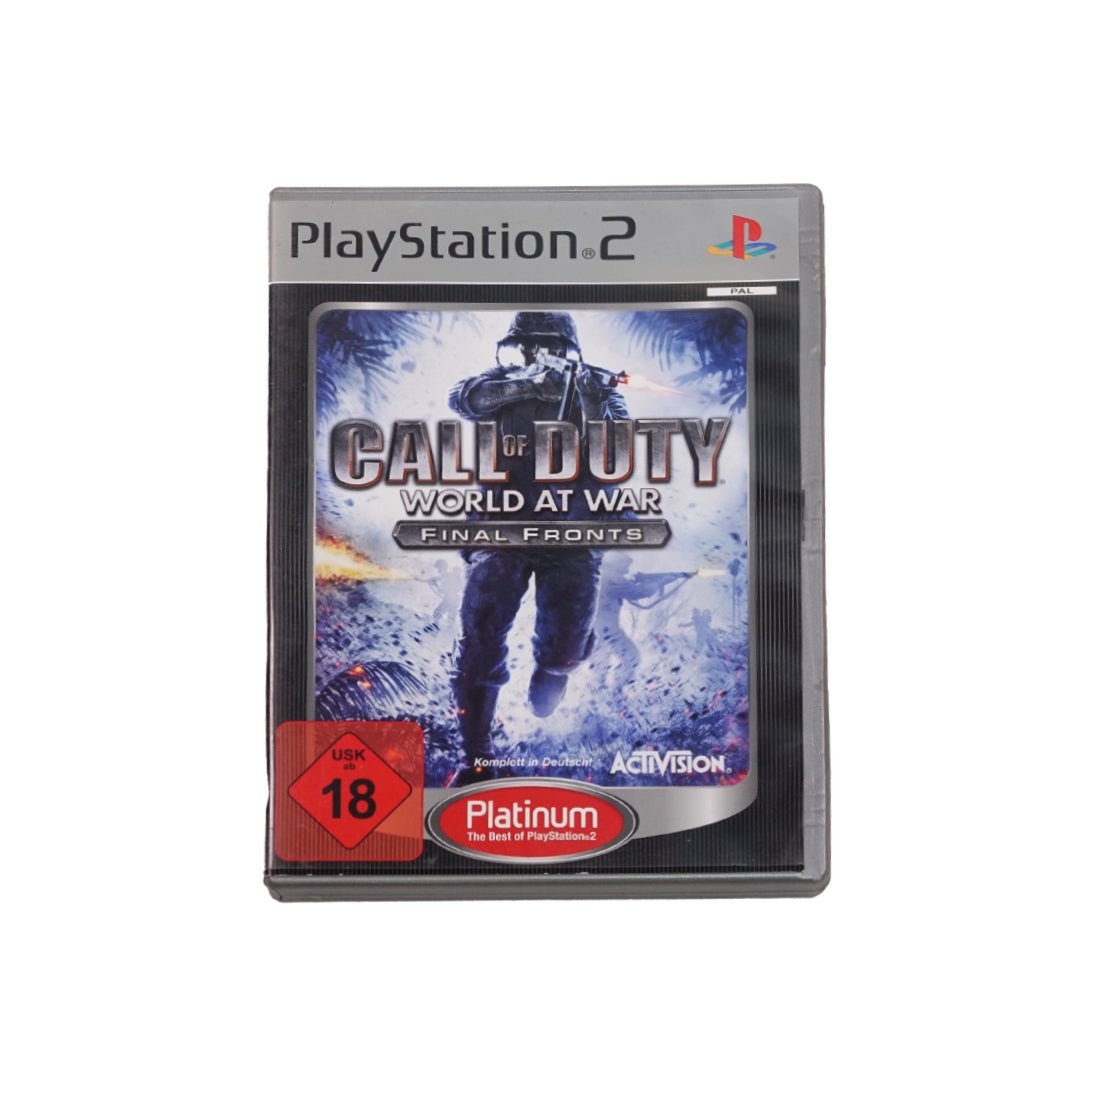 (Pre-Owned) Call of Duty: World at War Final Fronts - PlayStation 2 - Store 974 | ستور ٩٧٤